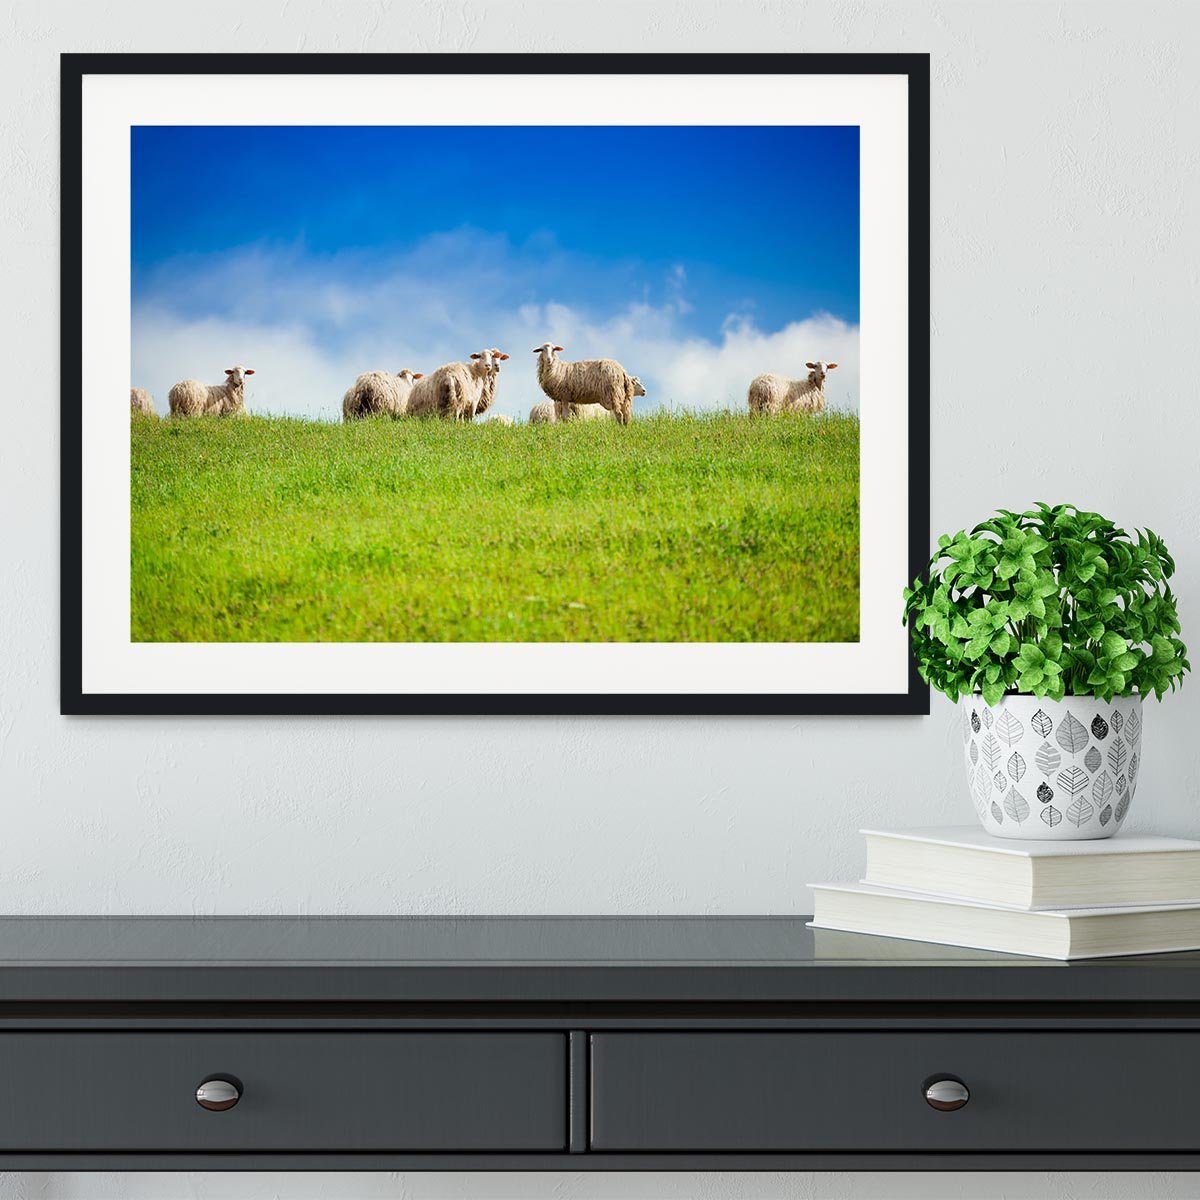 Two sheep looking at camera standing in herd Framed Print - Canvas Art Rocks - 1